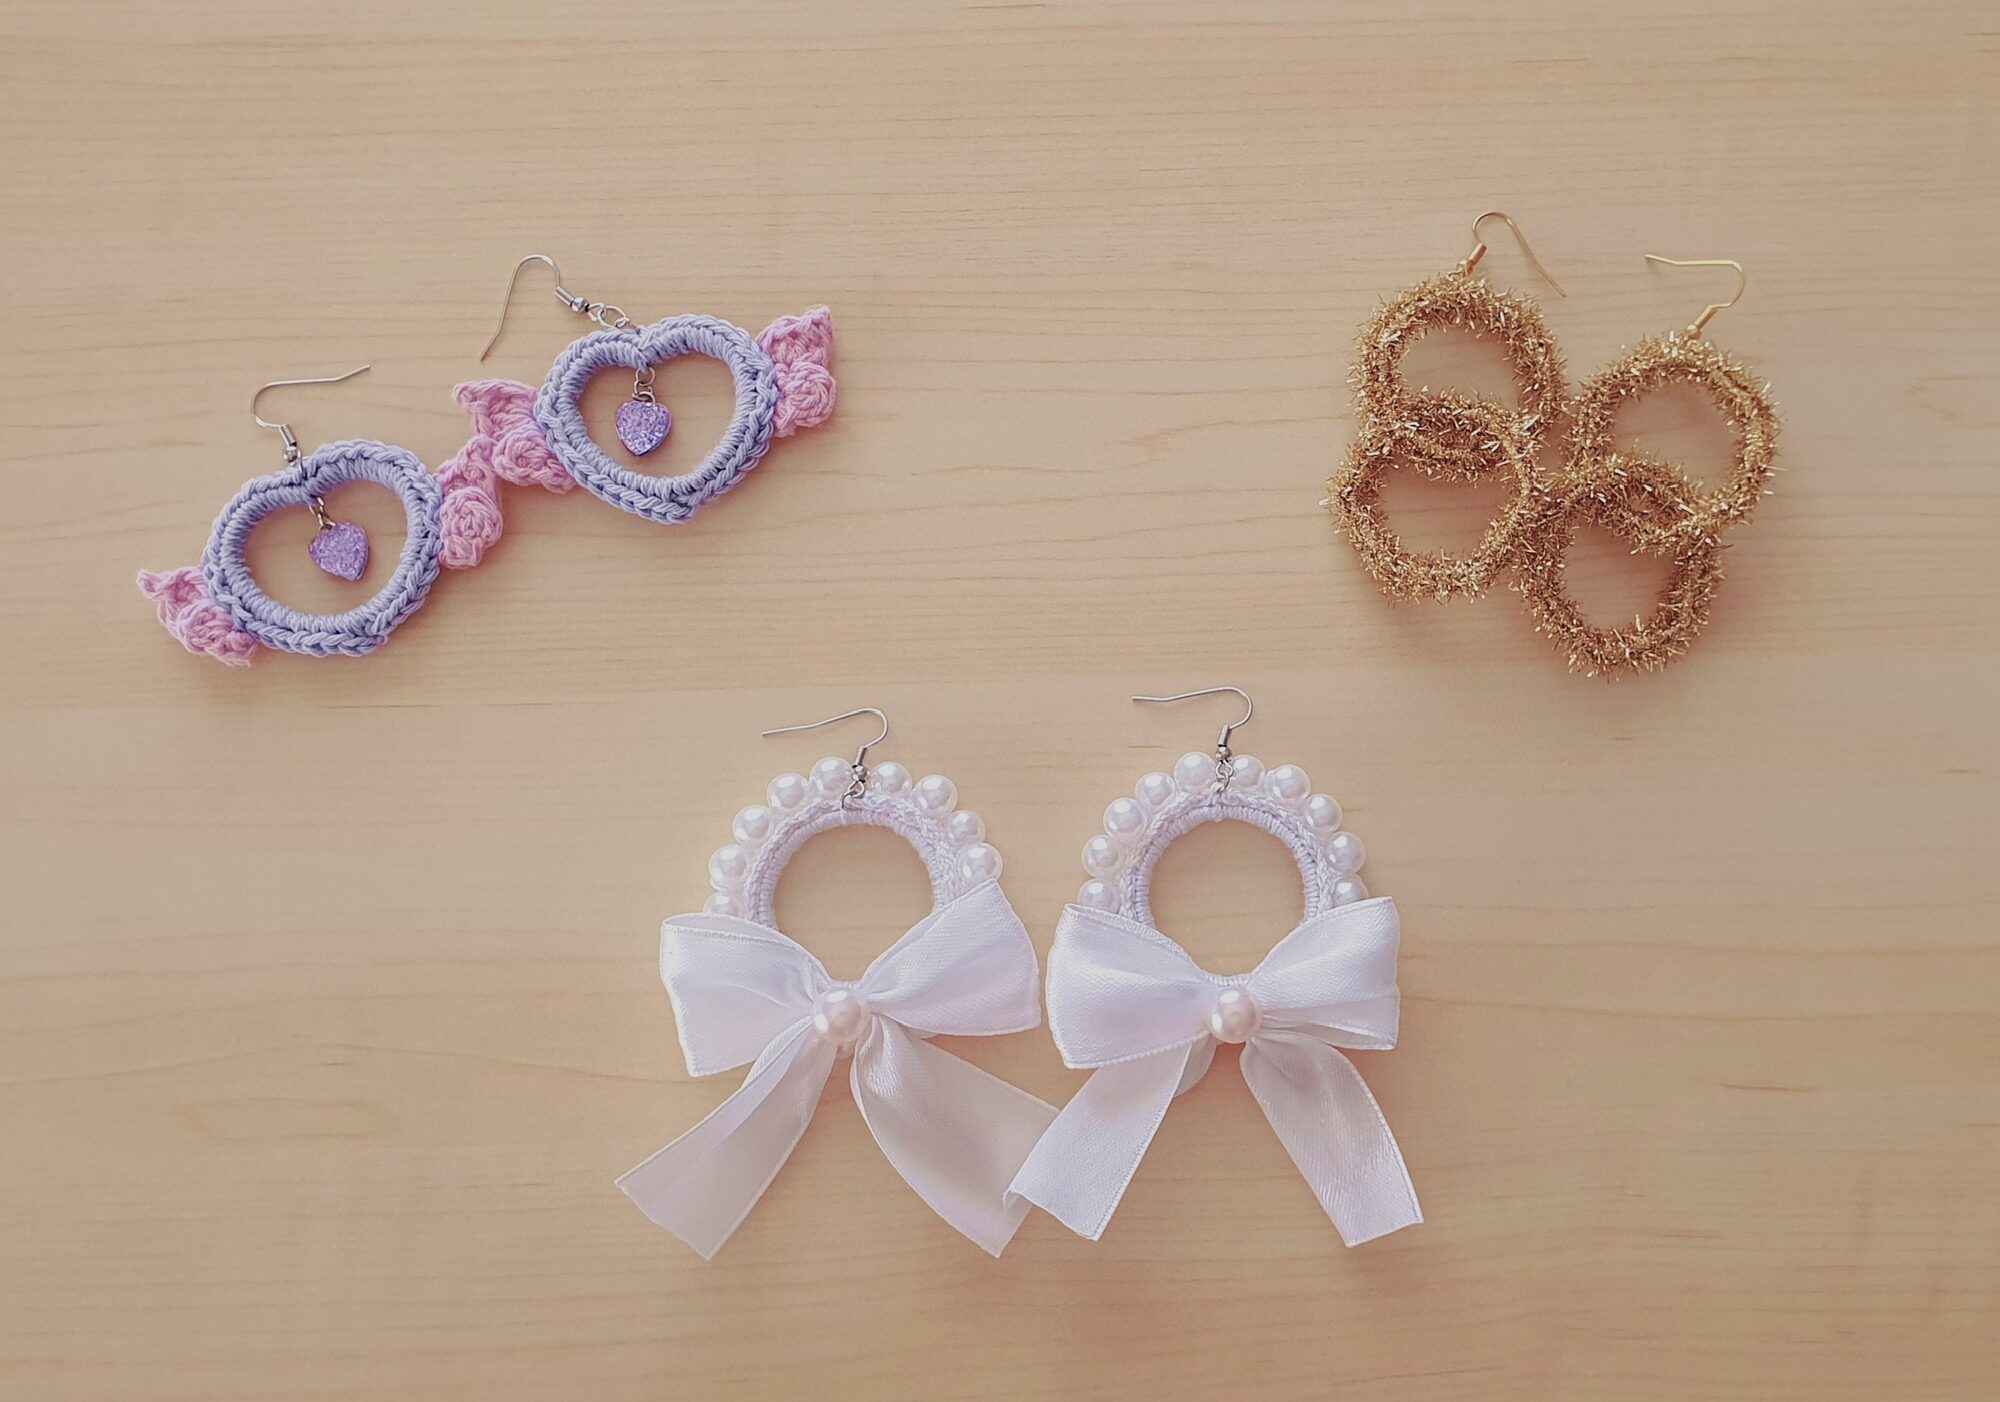 Creative ways to upcycle plastic rings into crochet earrings